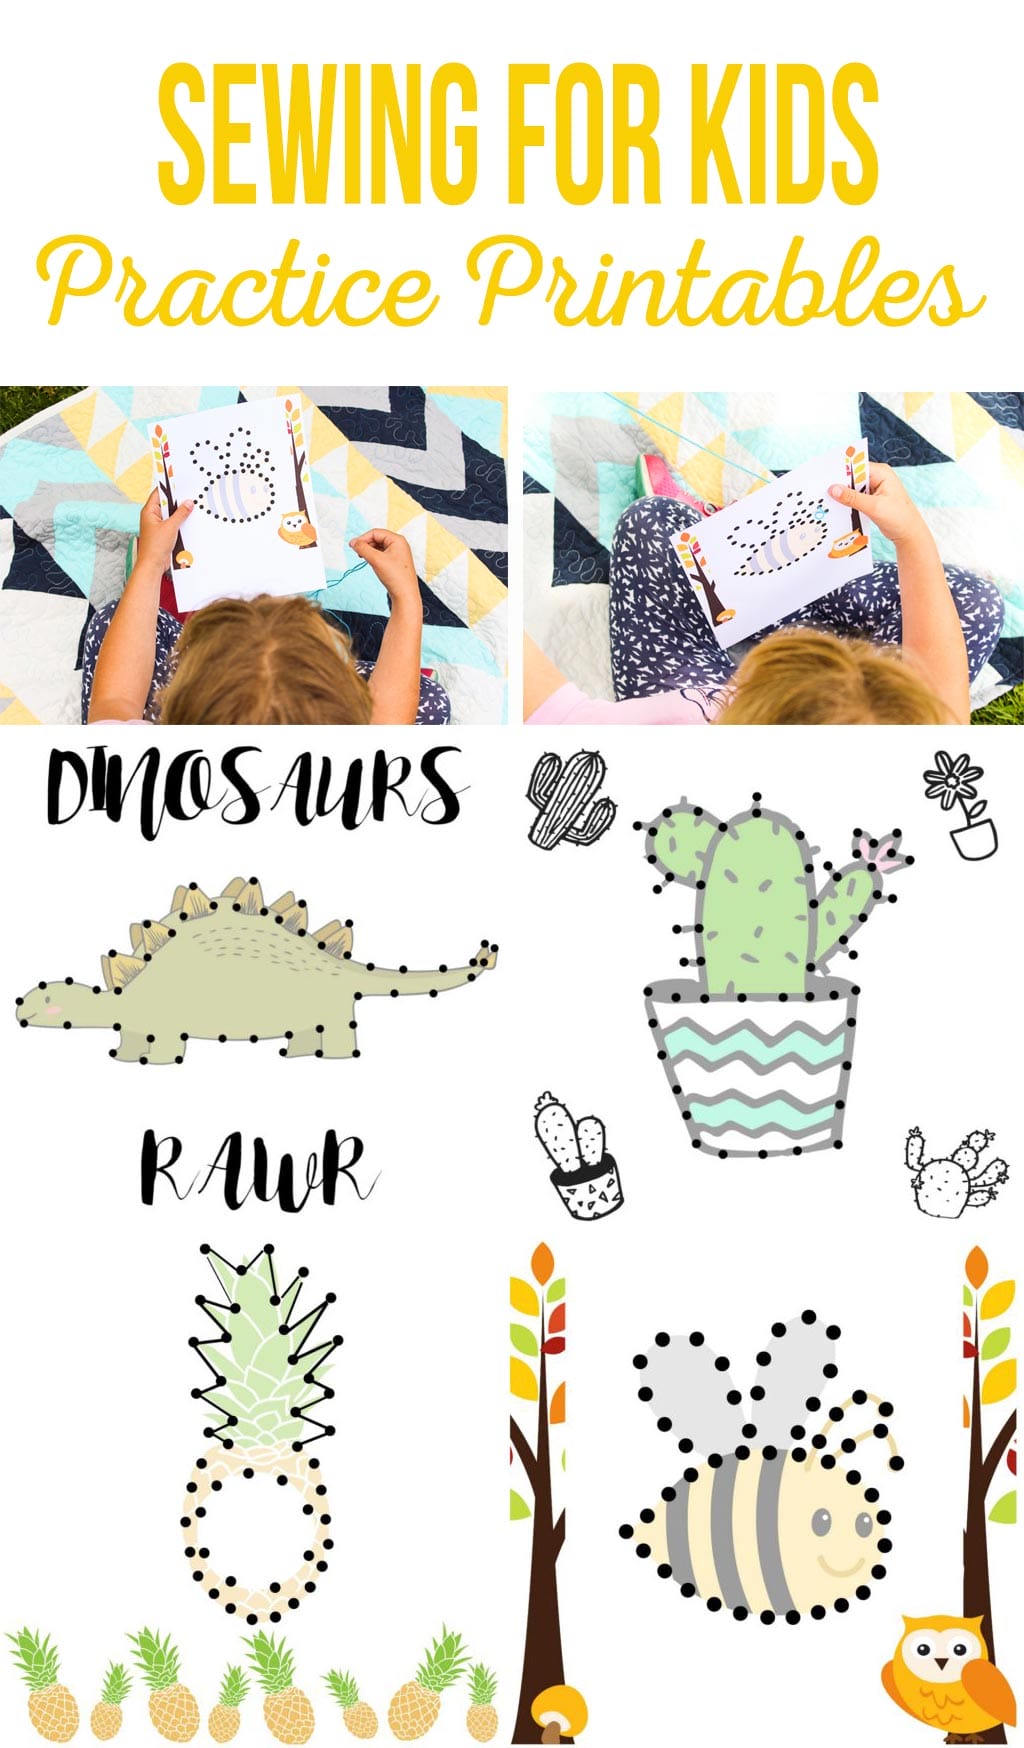 Sewing for Kids Practice Printables | A fun, simple kids activity that teaches coordination and sewing skills.